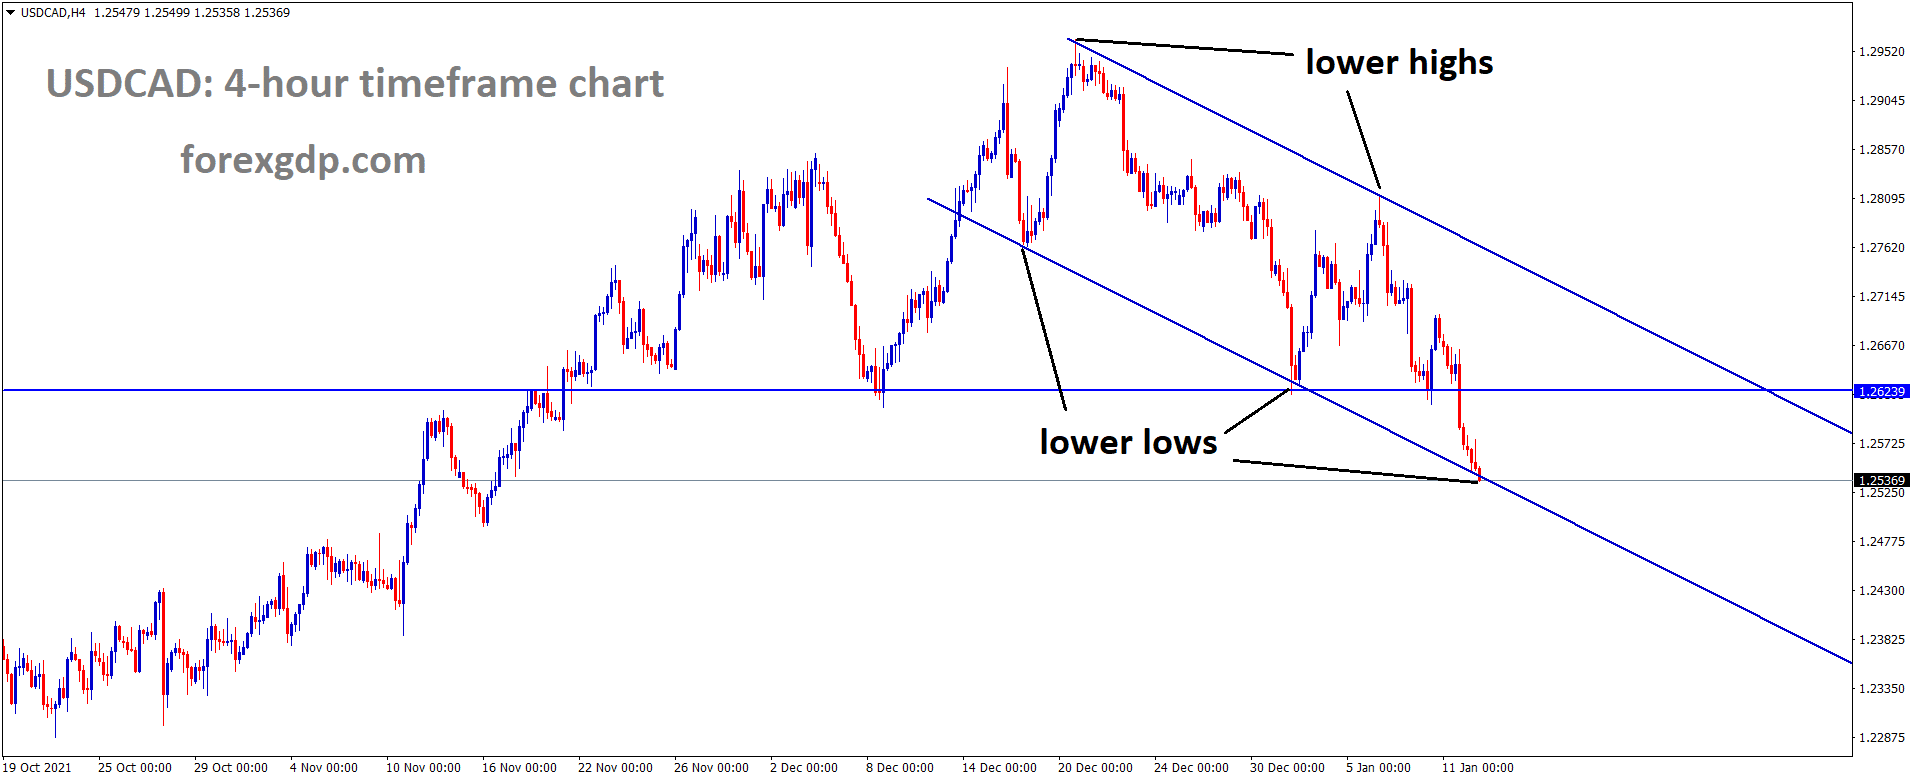 USDCAD is moving in the Descending channel and the market has reached the lower low area of the channel